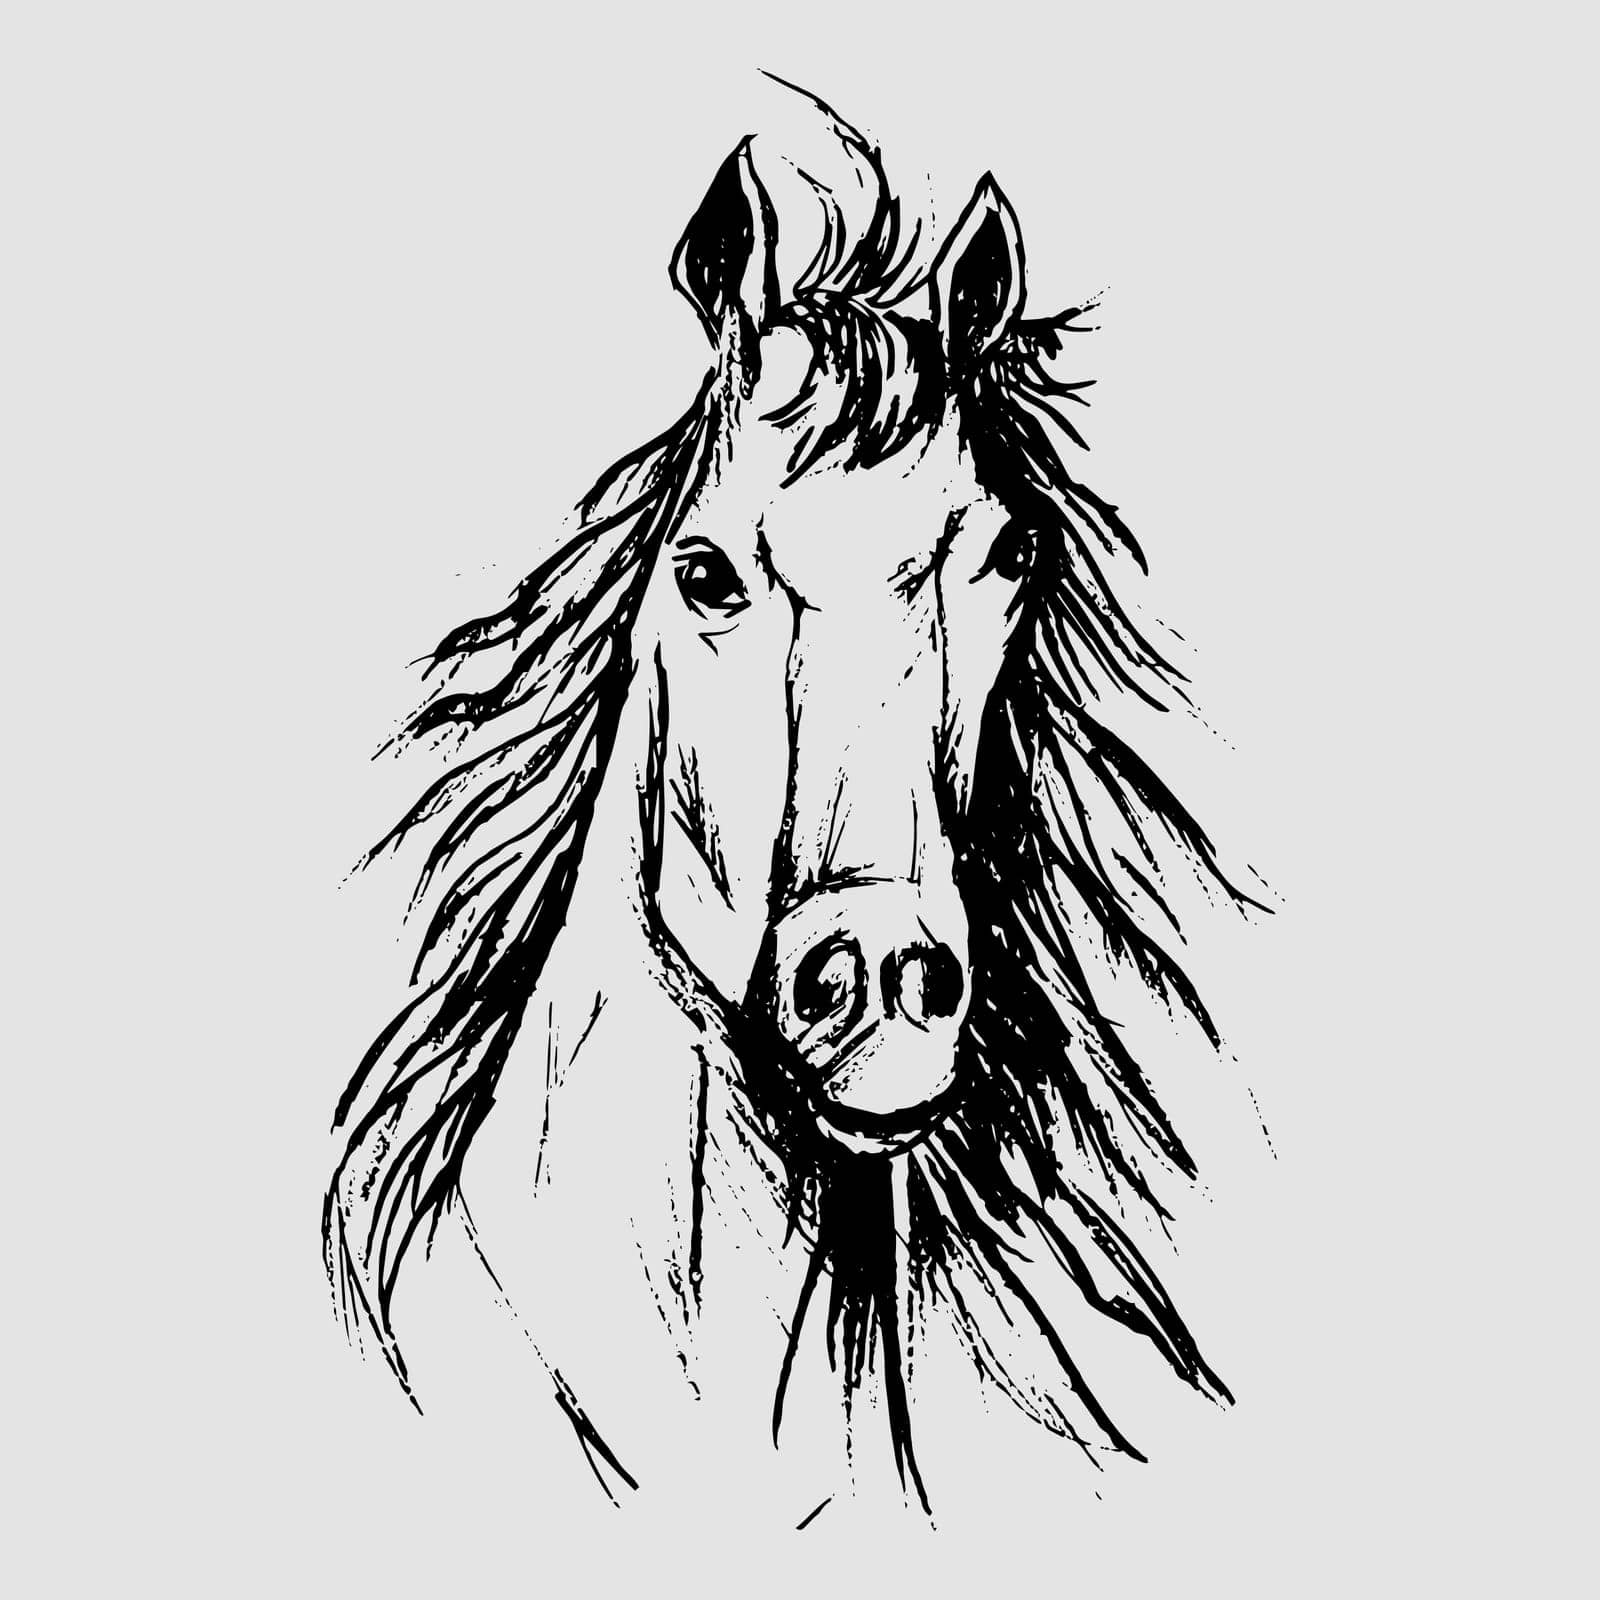 Horse scetch by black pencils in eps